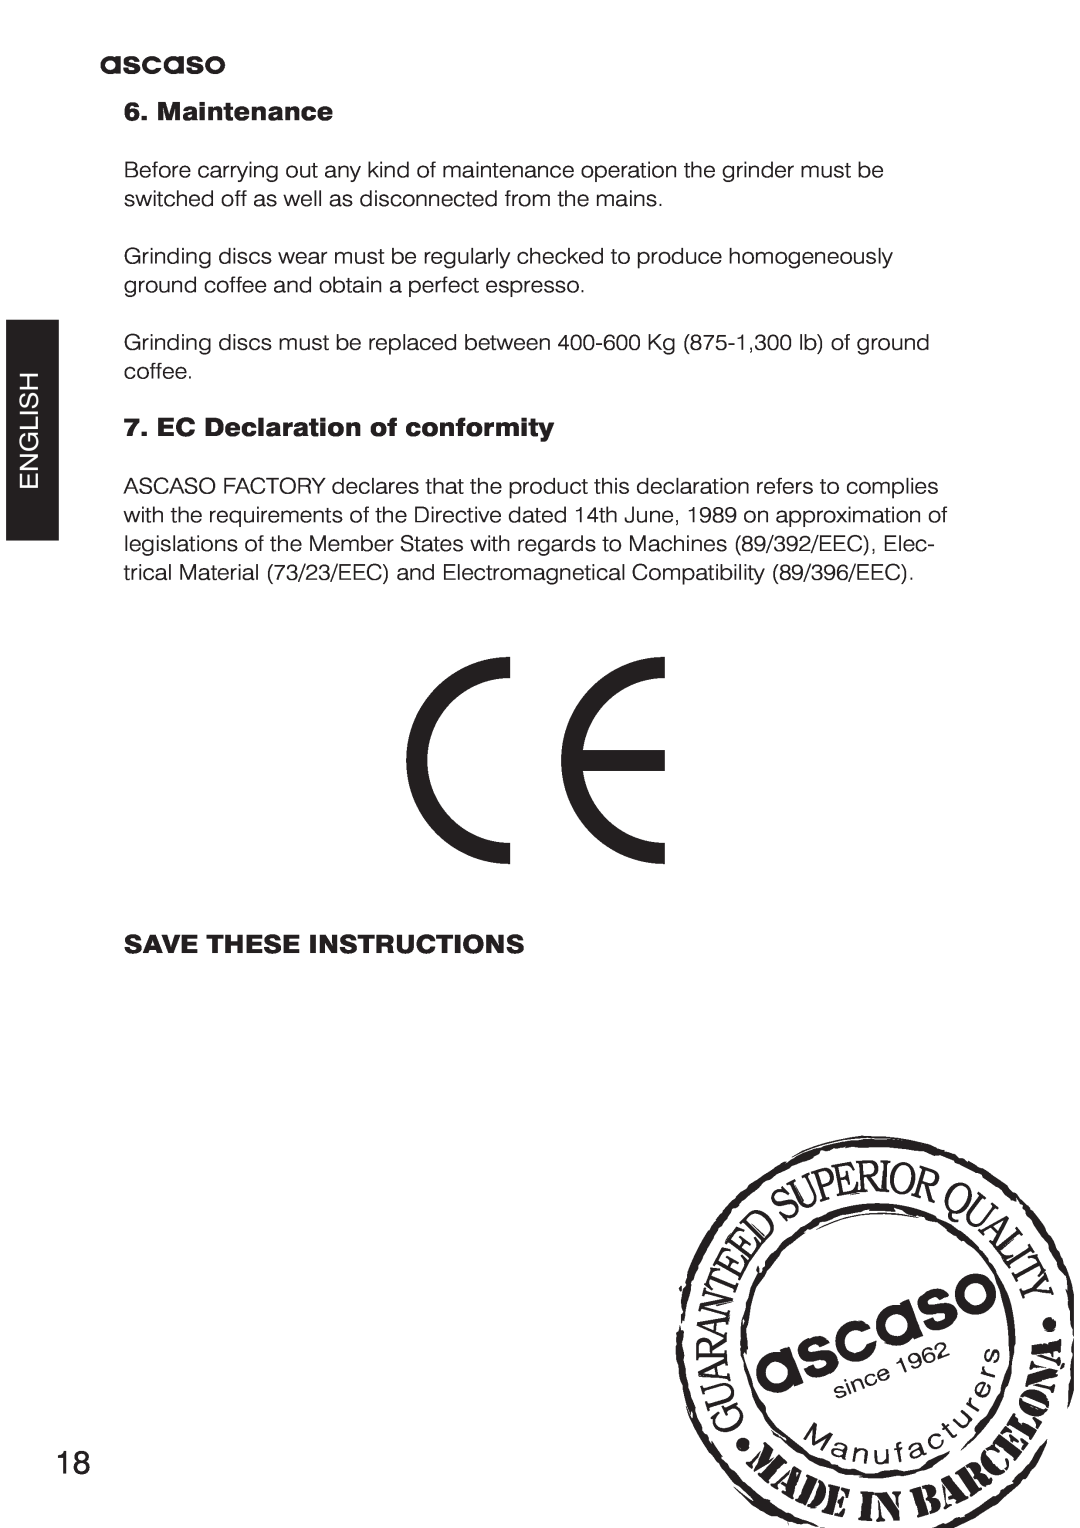 Ascaso Factory Professional System user manual Maintenance, EC Declaration of conformity, Save These Instructions, English 